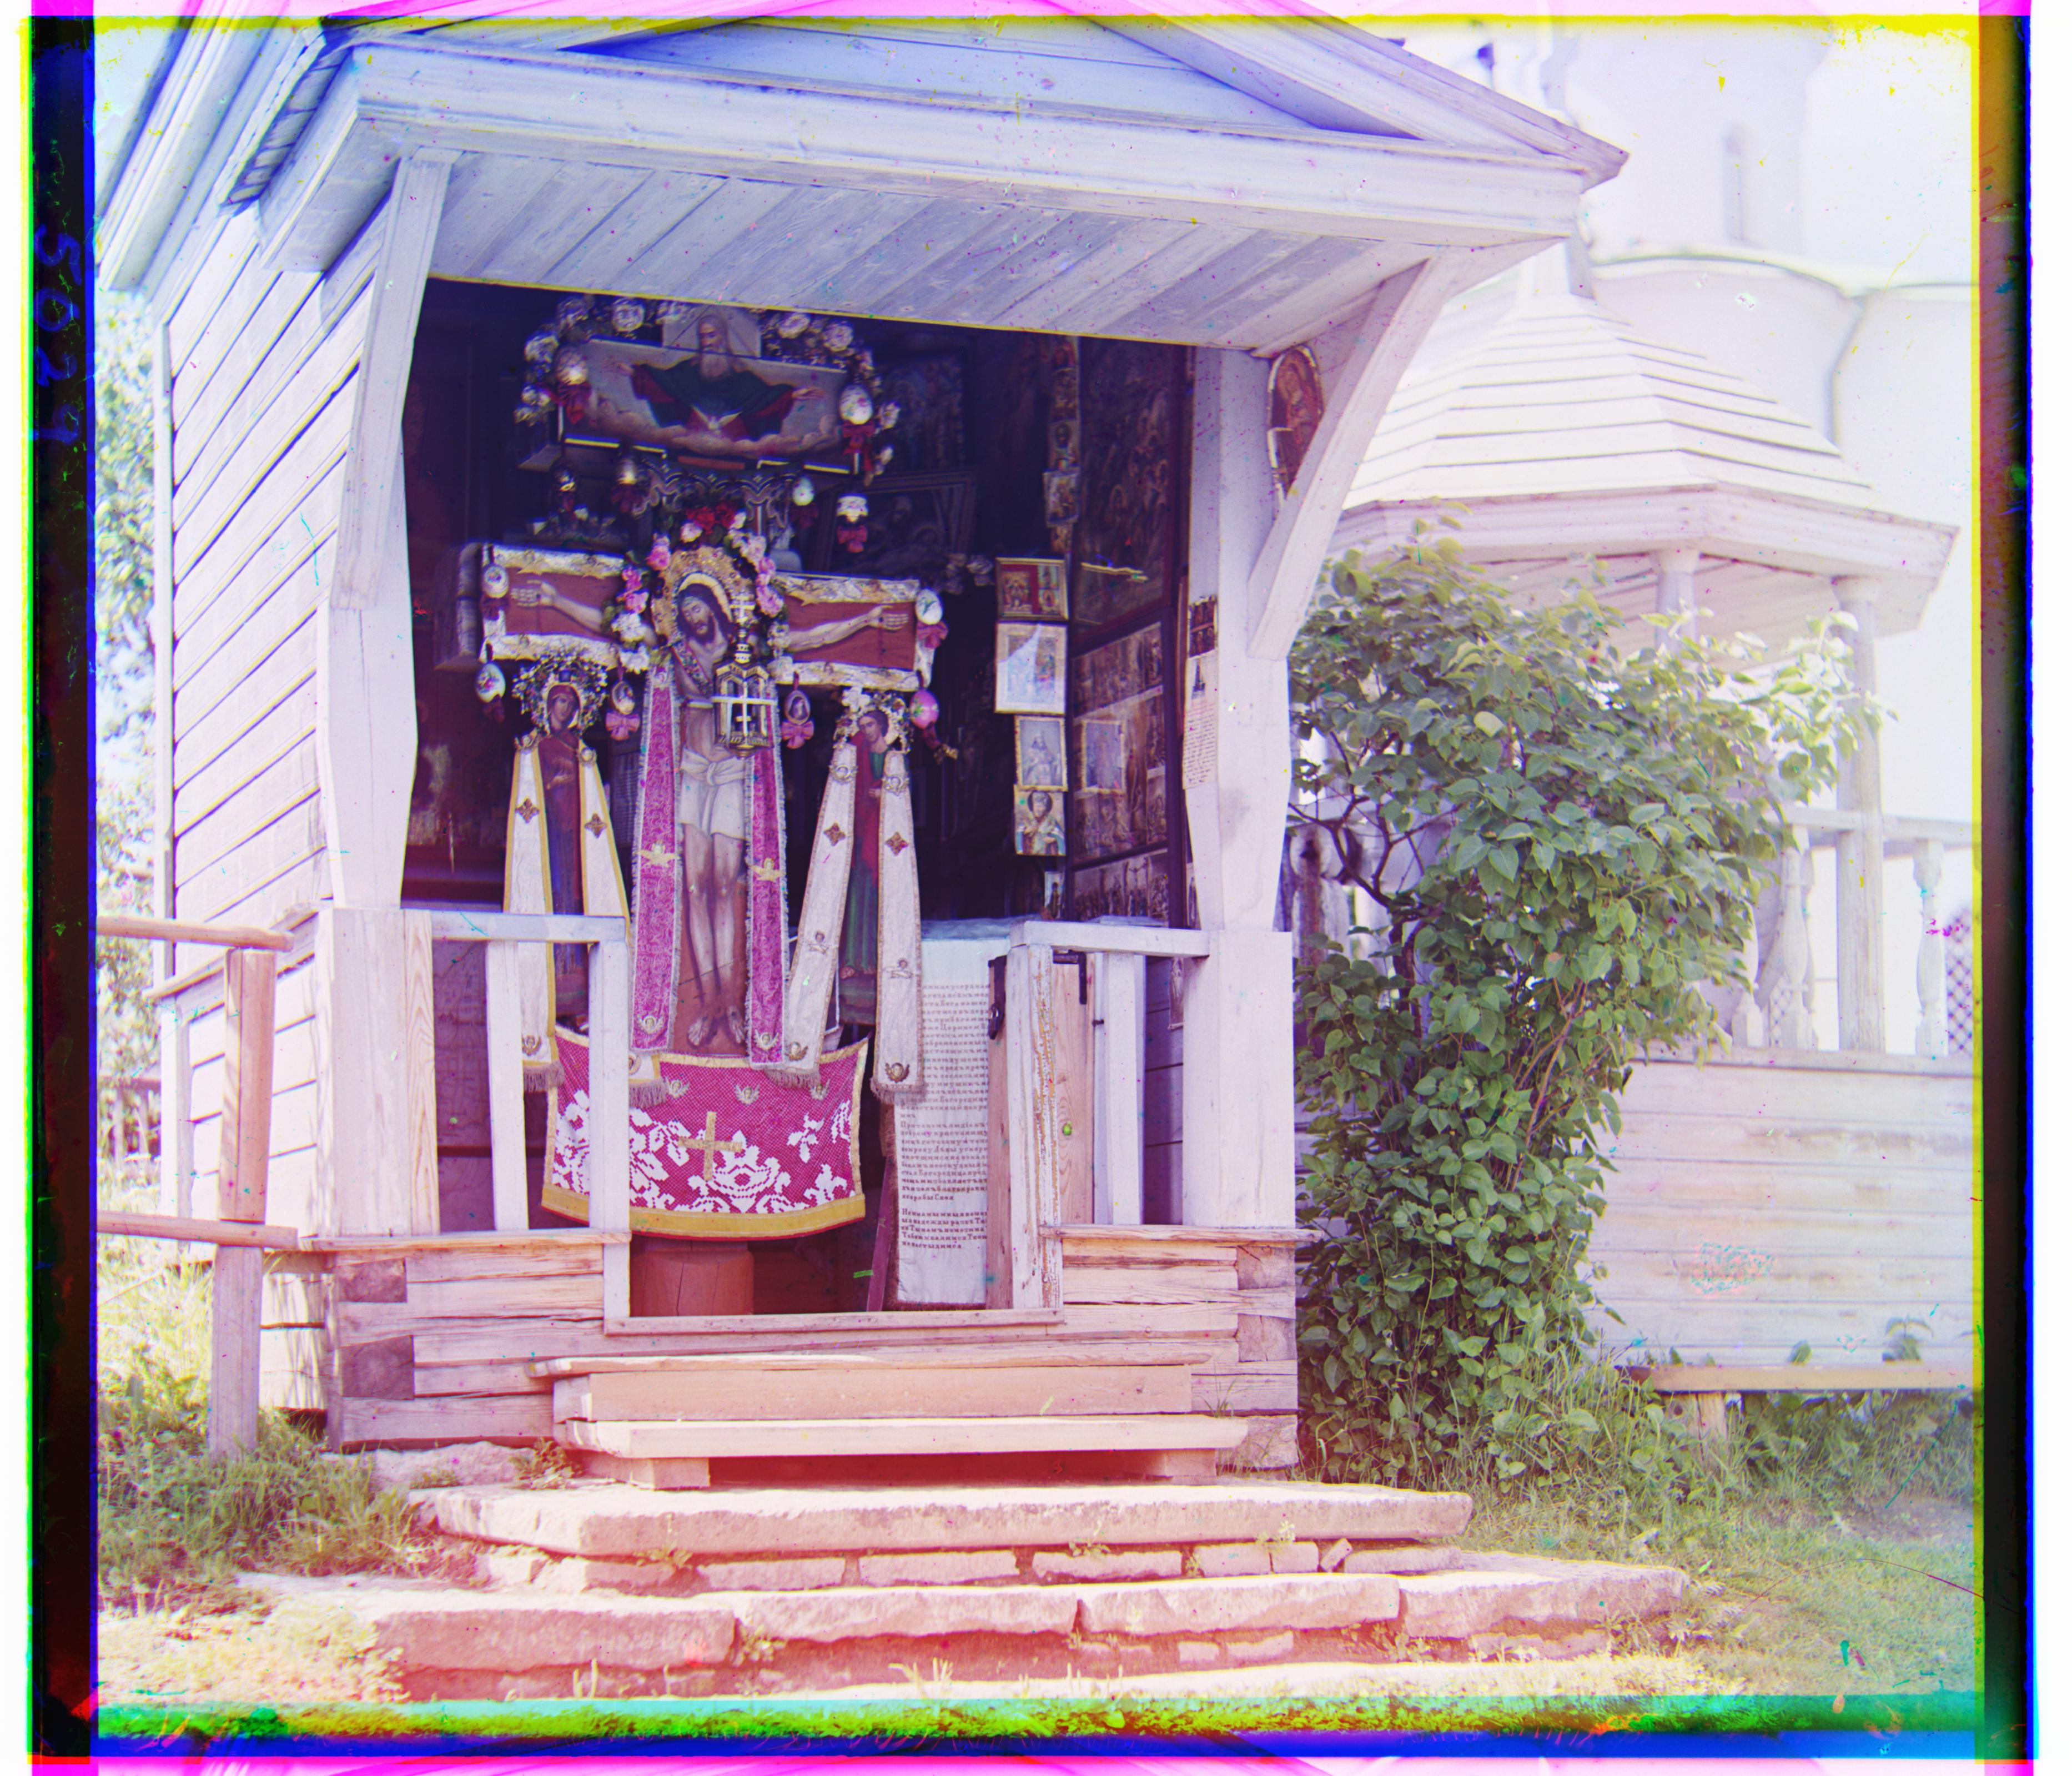 Jesus on a Cross in front of a House